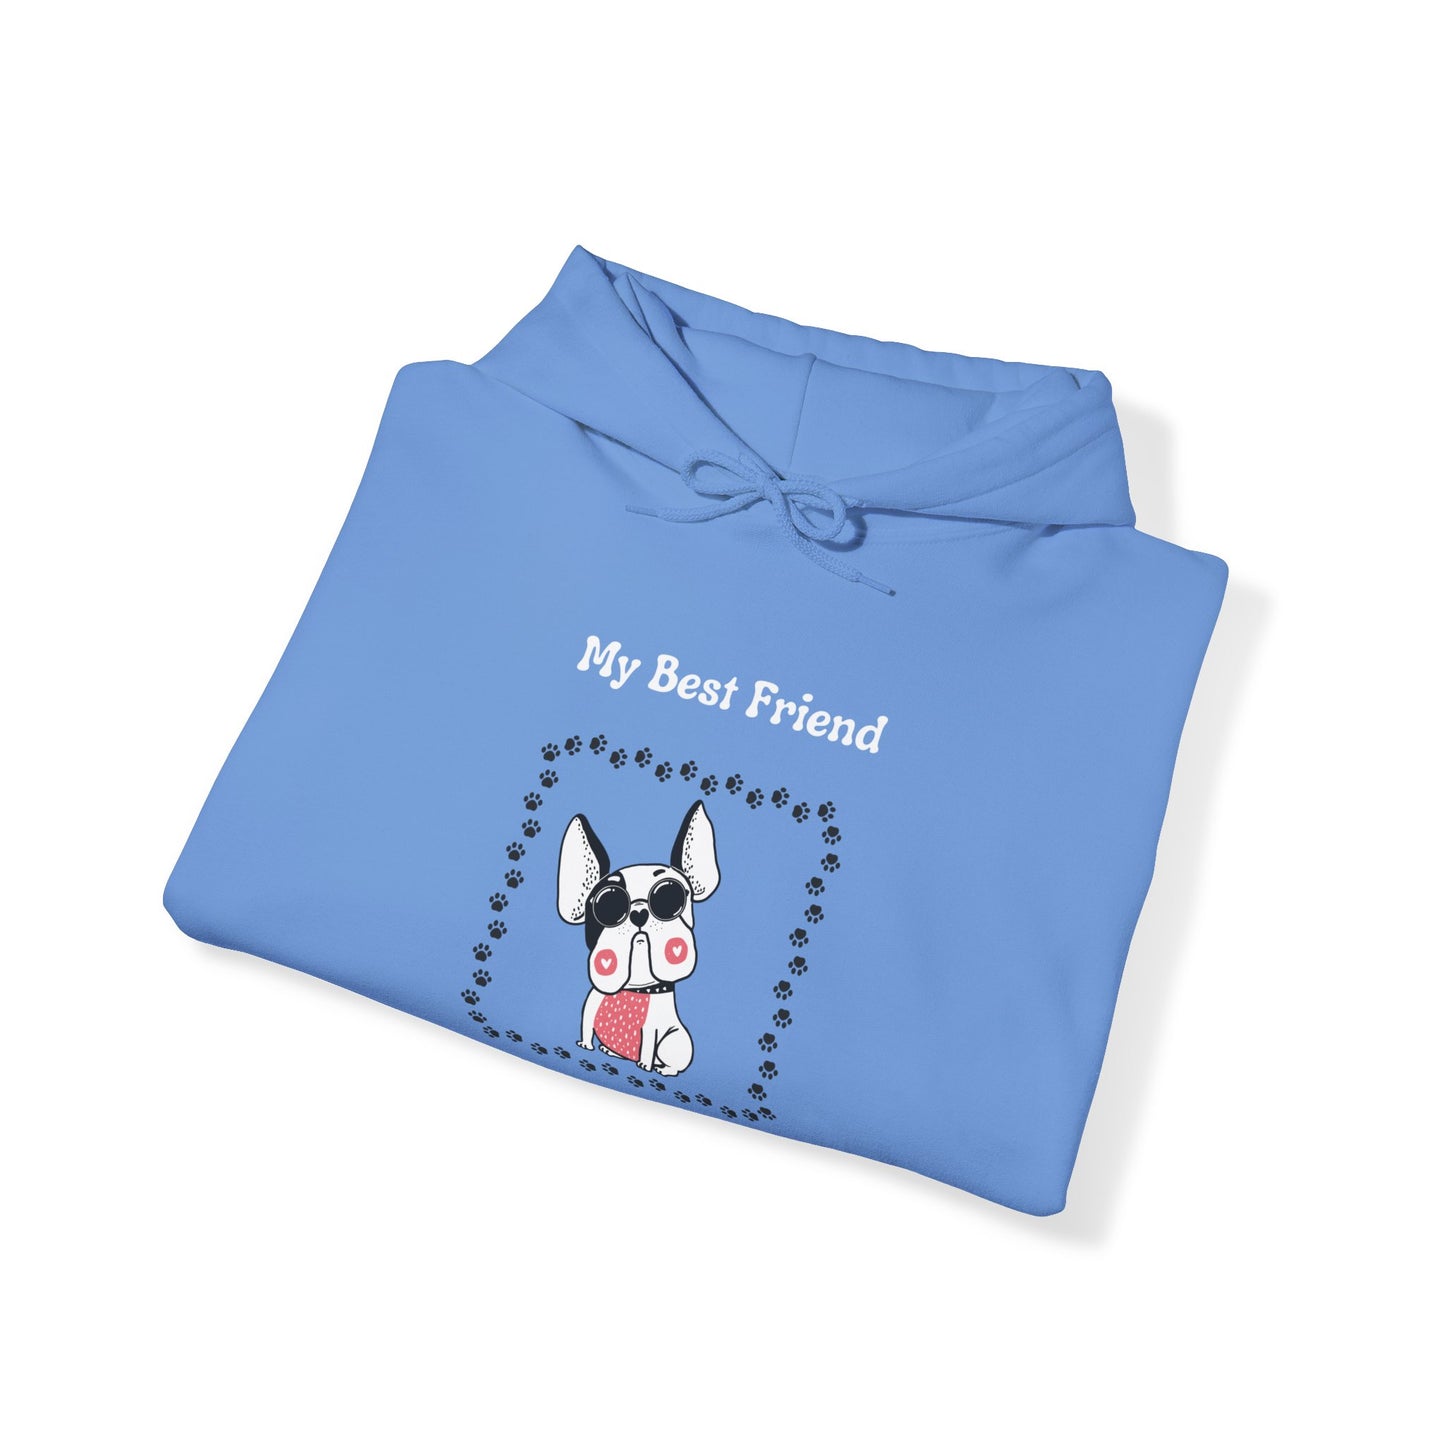 Frenchie The Bull dog. My Best Friend Has Paws. Unisex Hooded Sweatshirt.